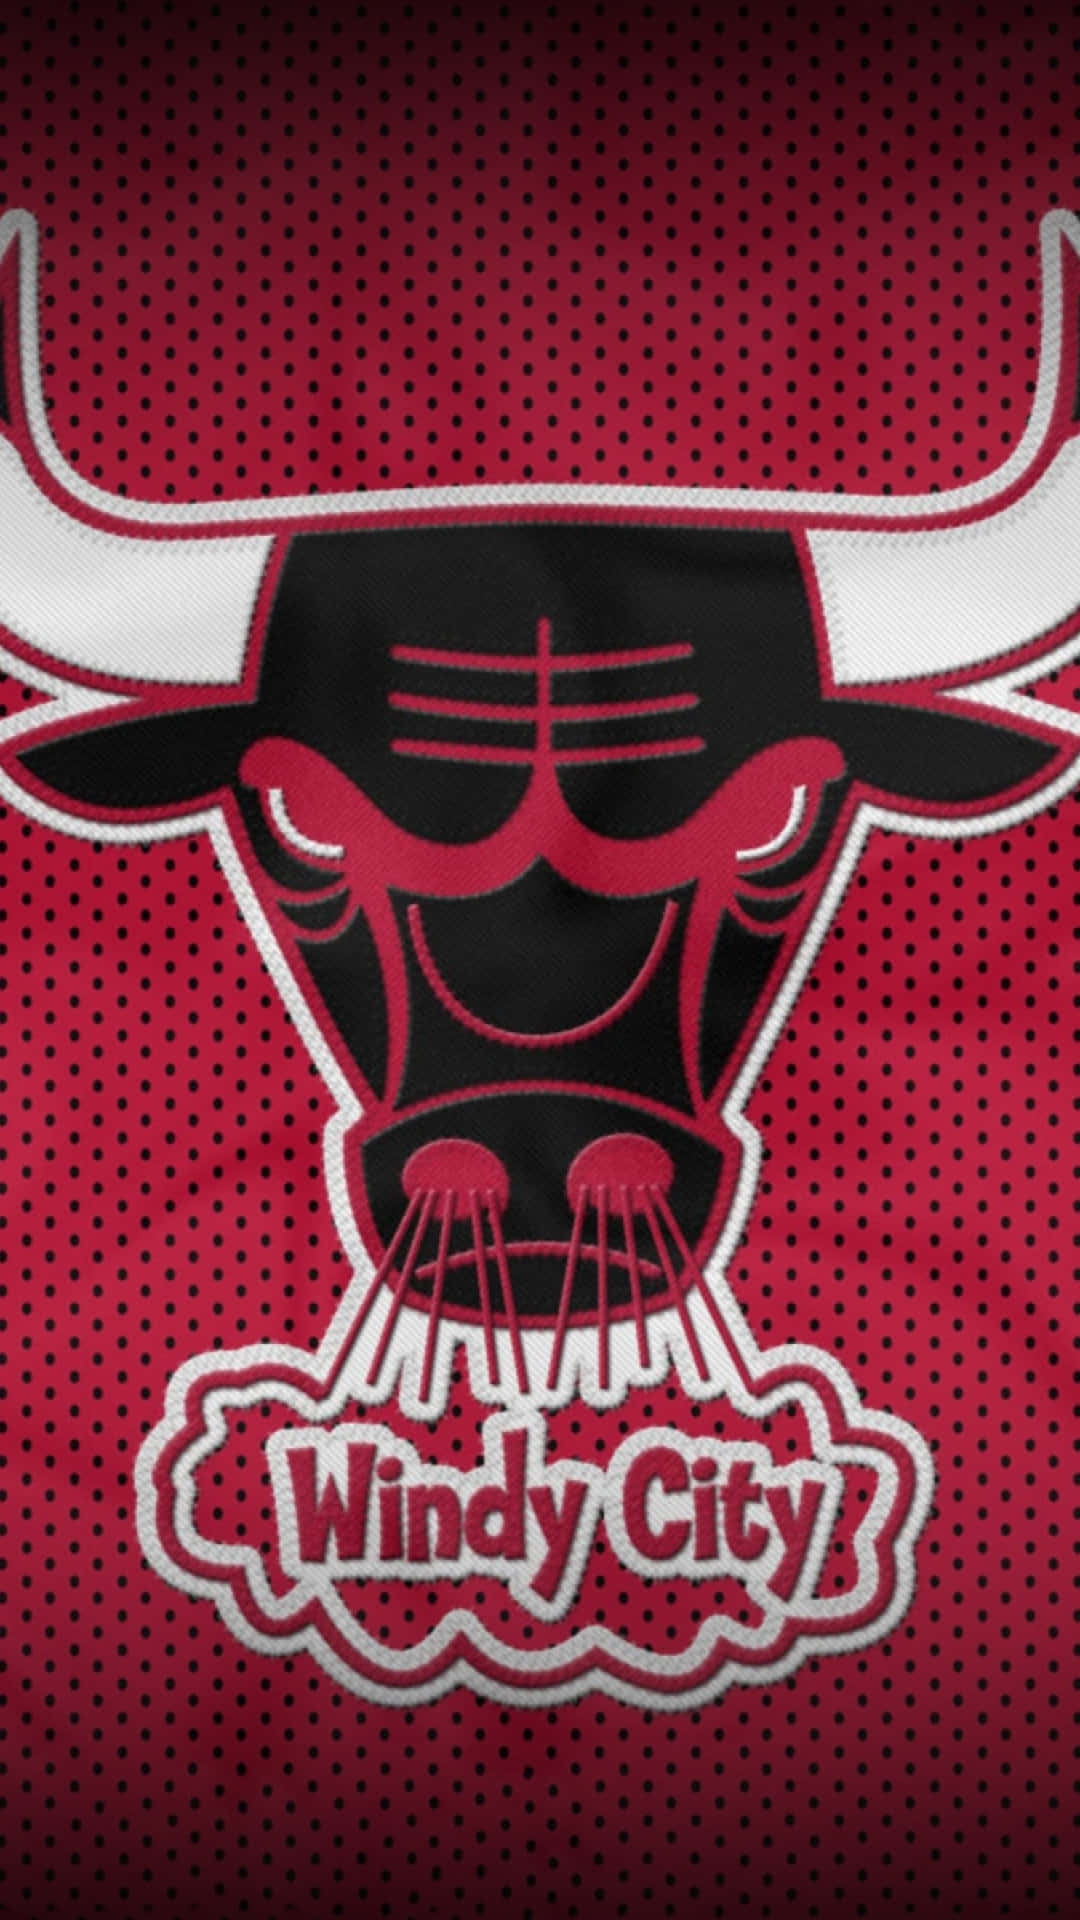 Support your team – Get the Chicago Bulls Iphone Wallpaper